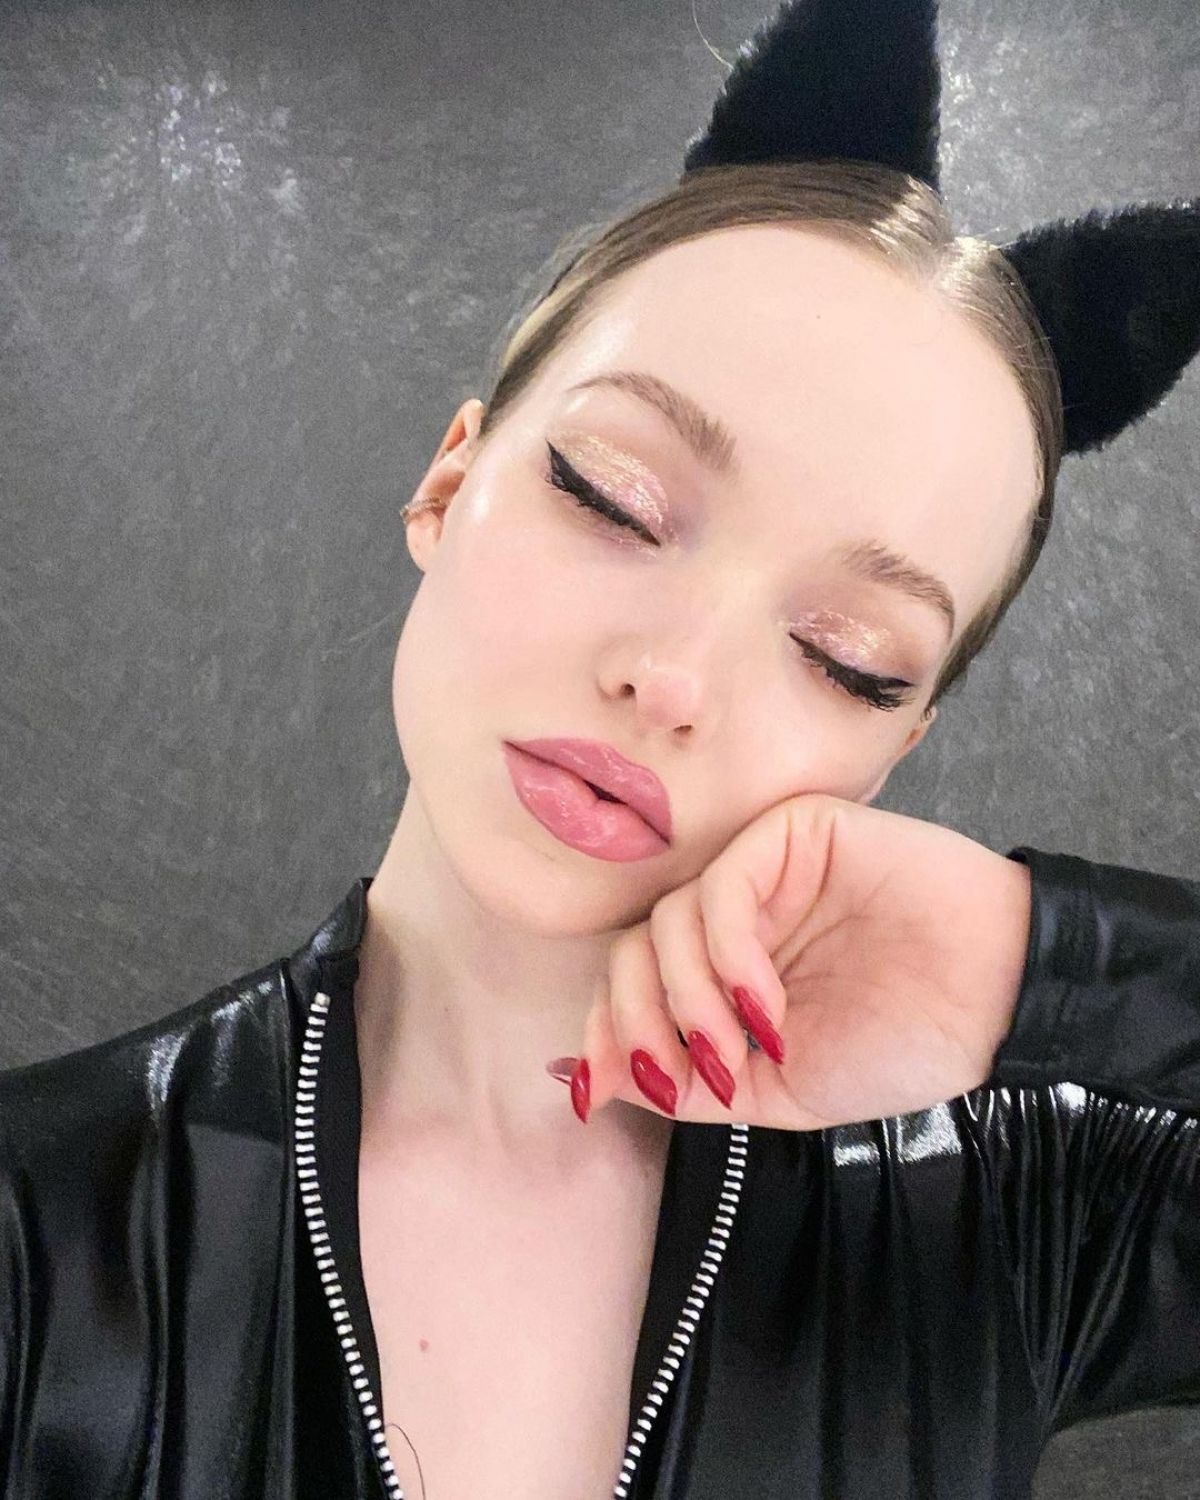 Dove Cameron In A Catsuit Getting Ready For Halloween Instagram Video And Photos 10 31 Hawtcelebs